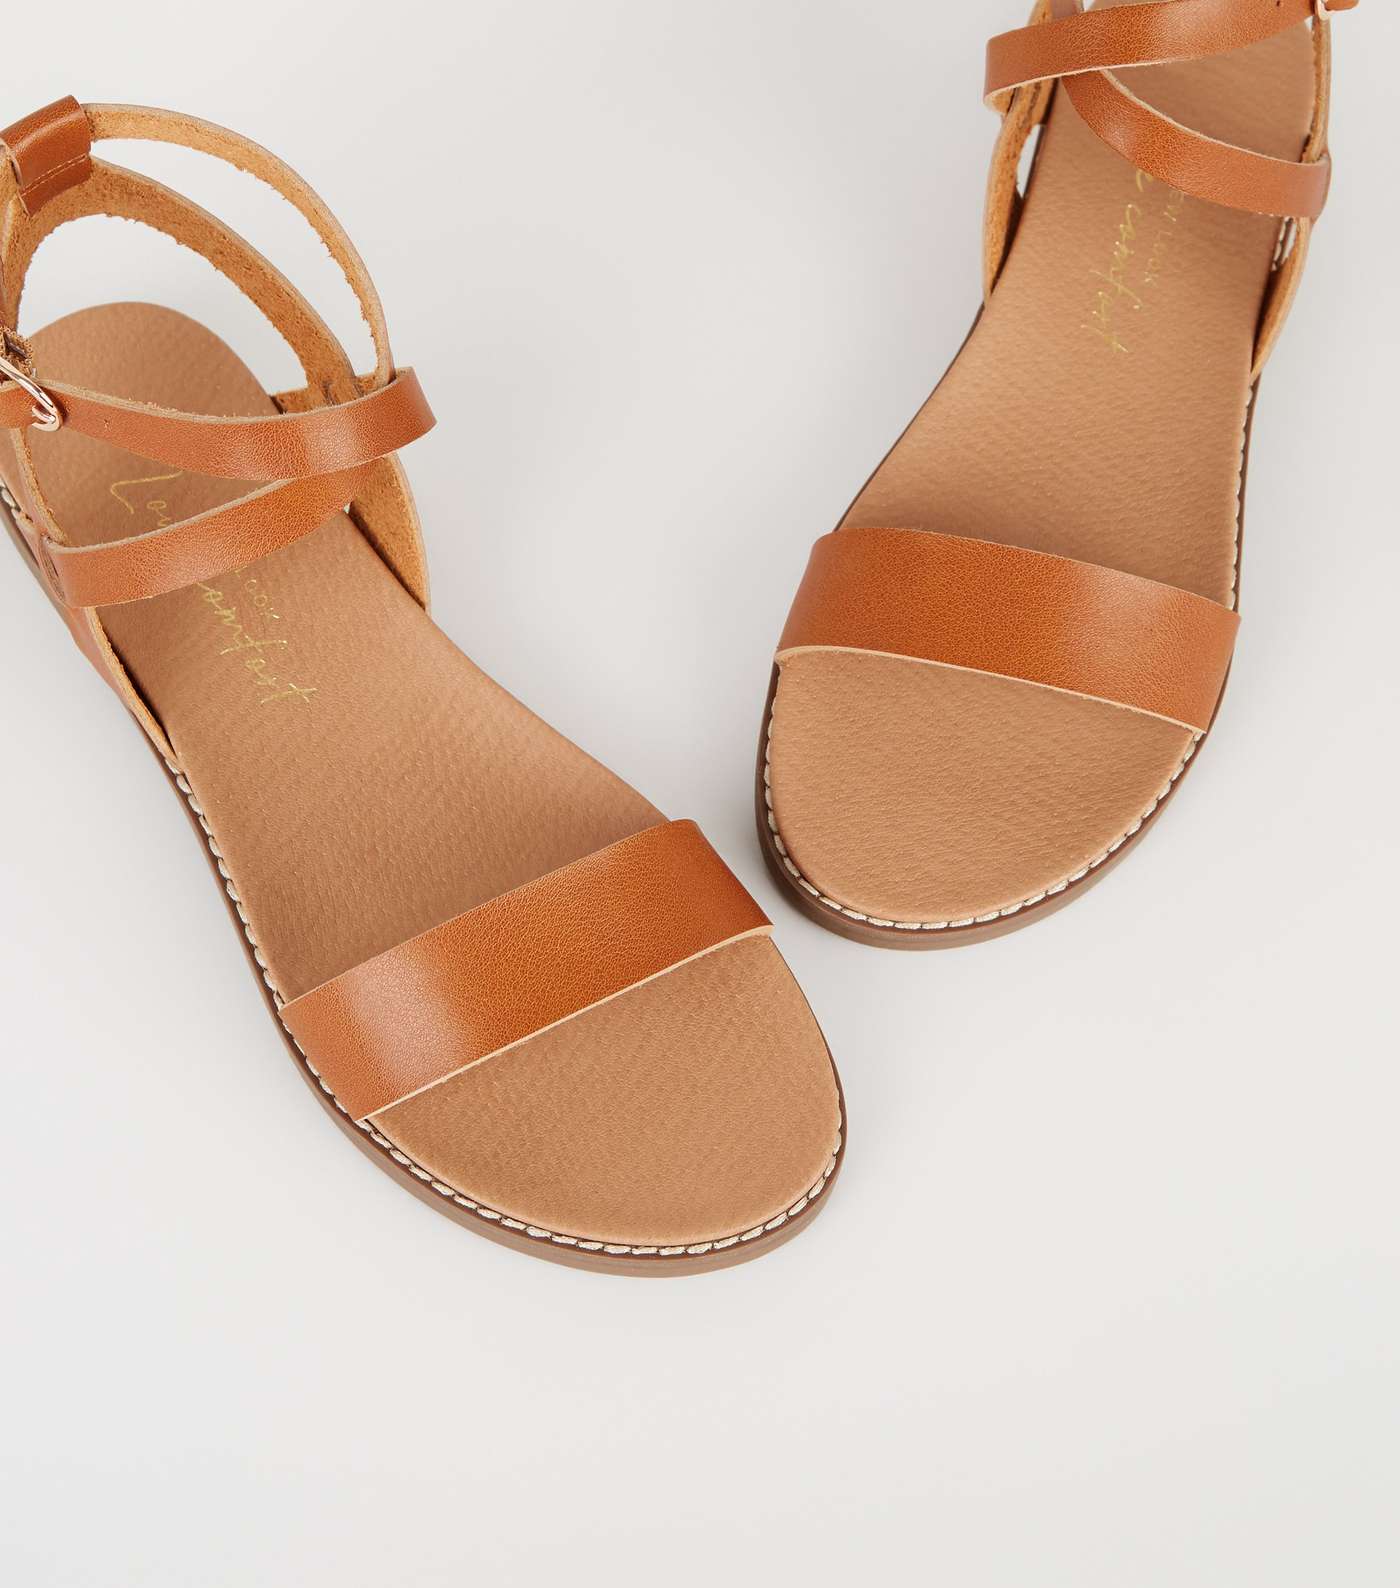 Tan Leather-Look Cross Strap Footbed Sandals Image 3